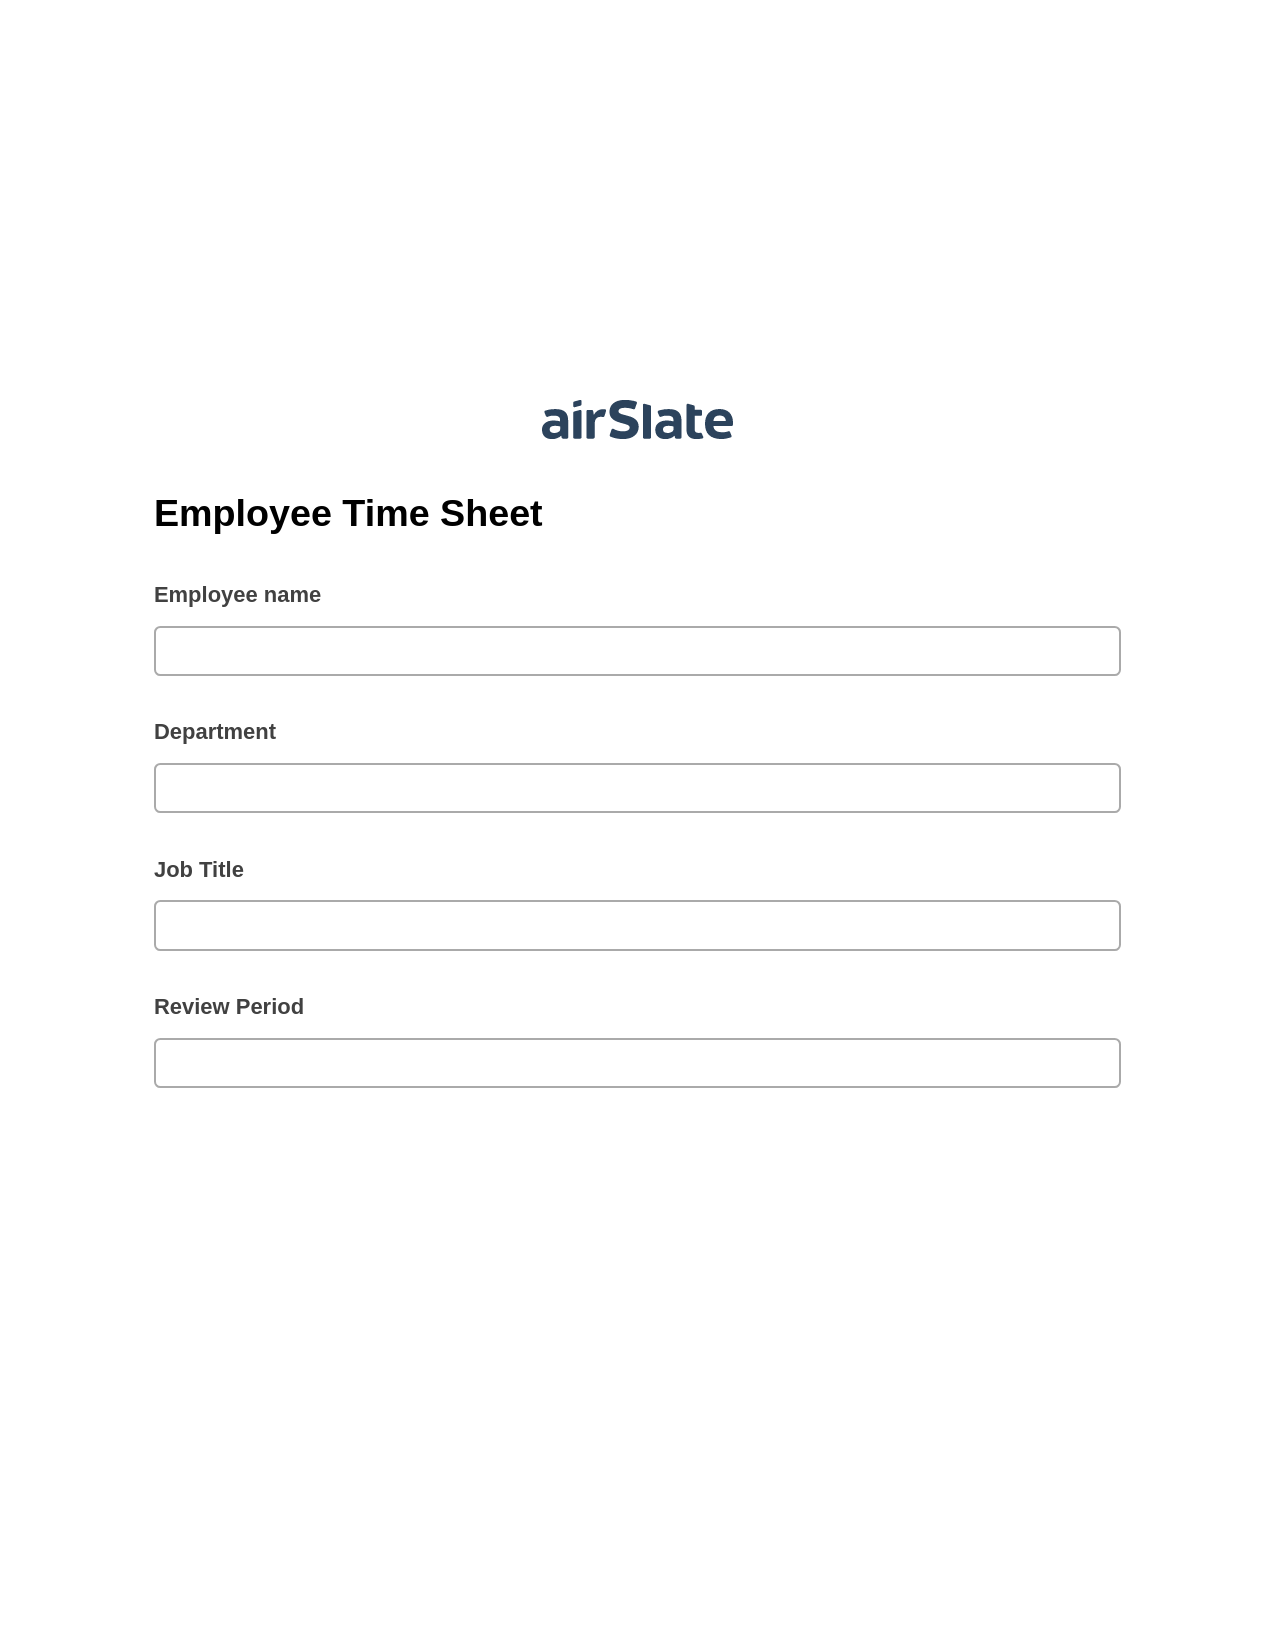 Multirole Employee Time Sheet Pre-fill from CSV File Bot, Update NetSuite Record Bot, Export to Smartsheet